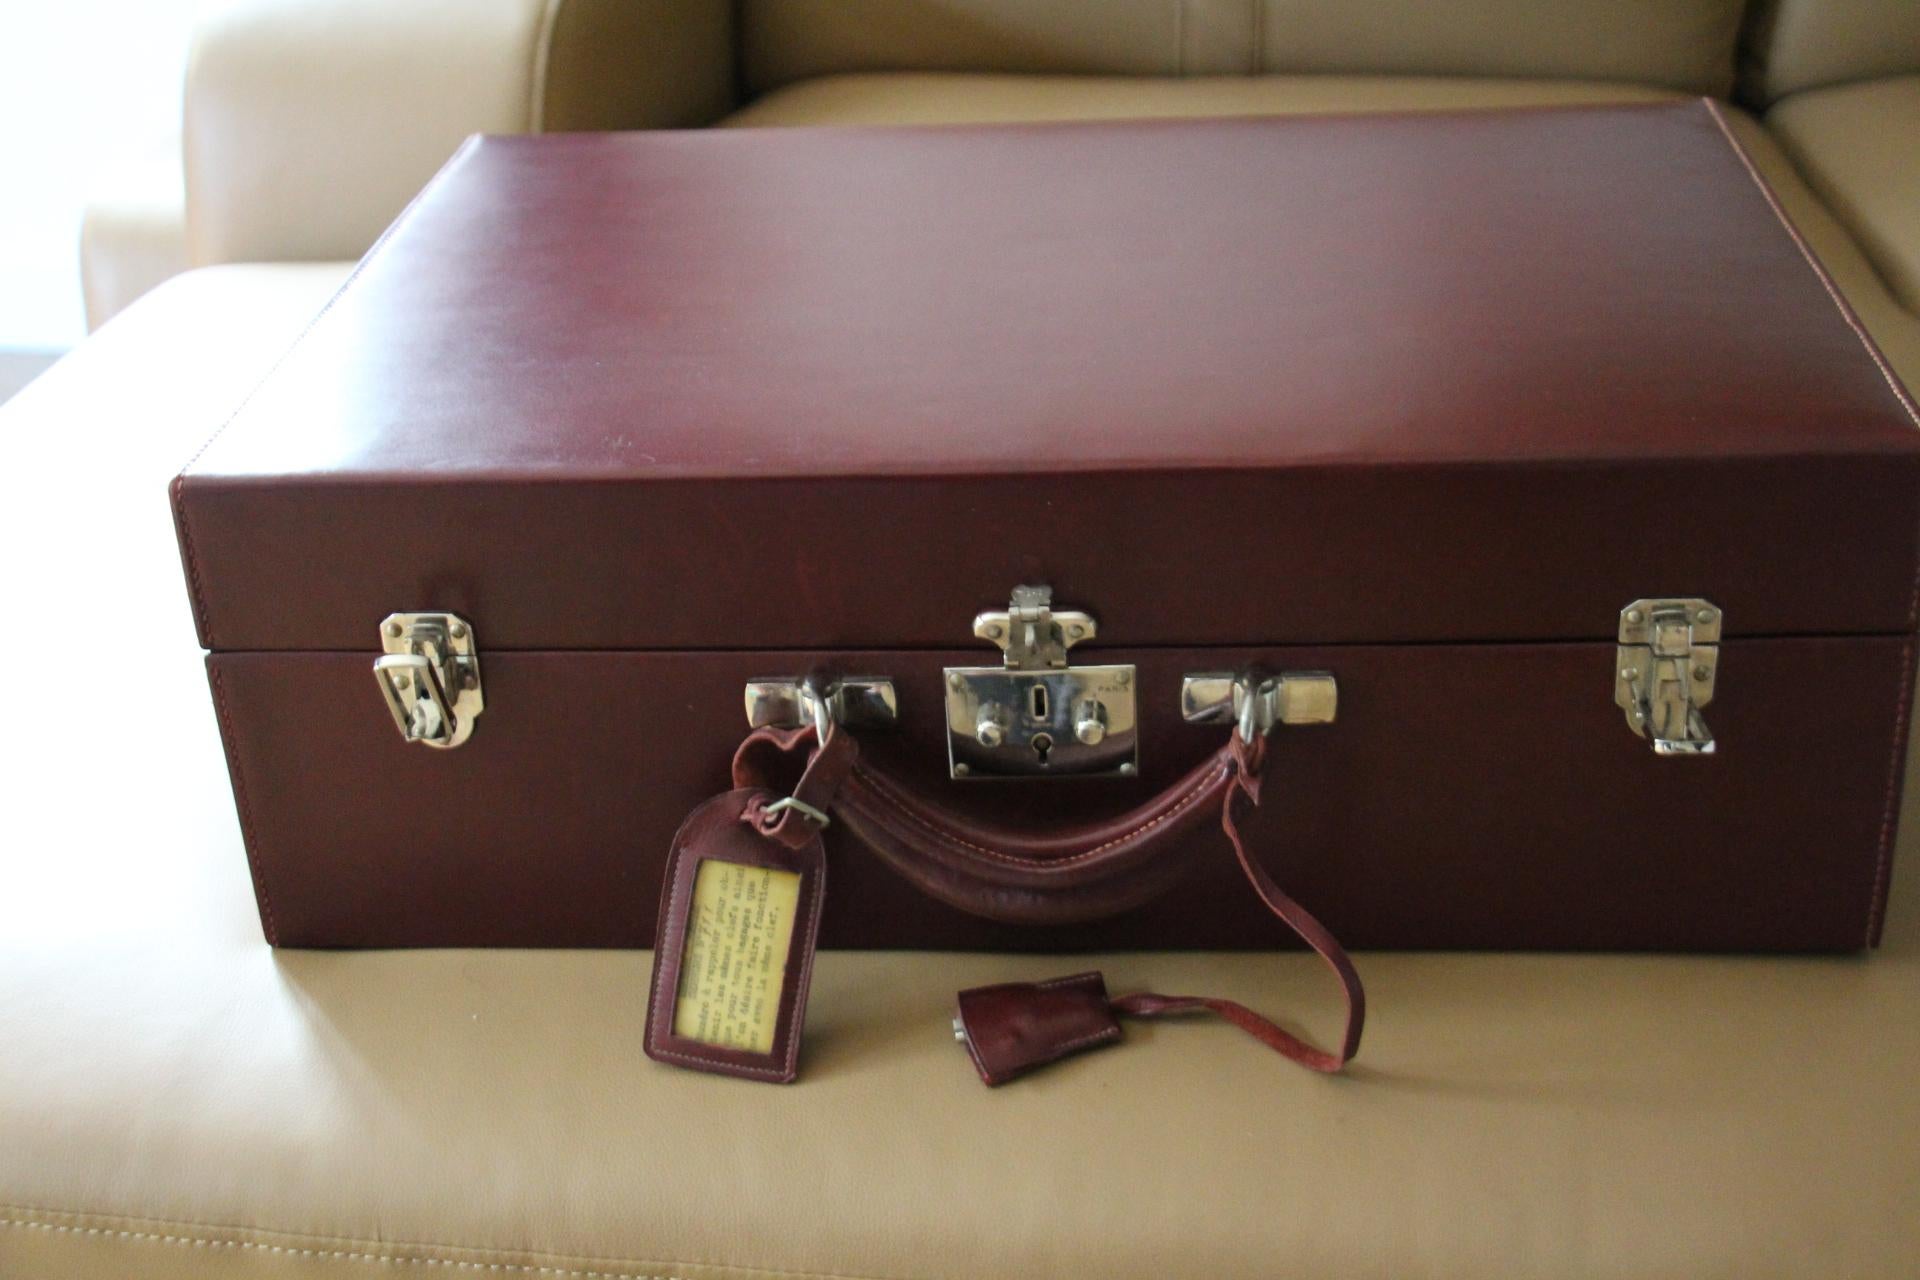 Red Leather Hermes Suitcase 53 cm, Hermes Trunk, Hermes Luggage 15